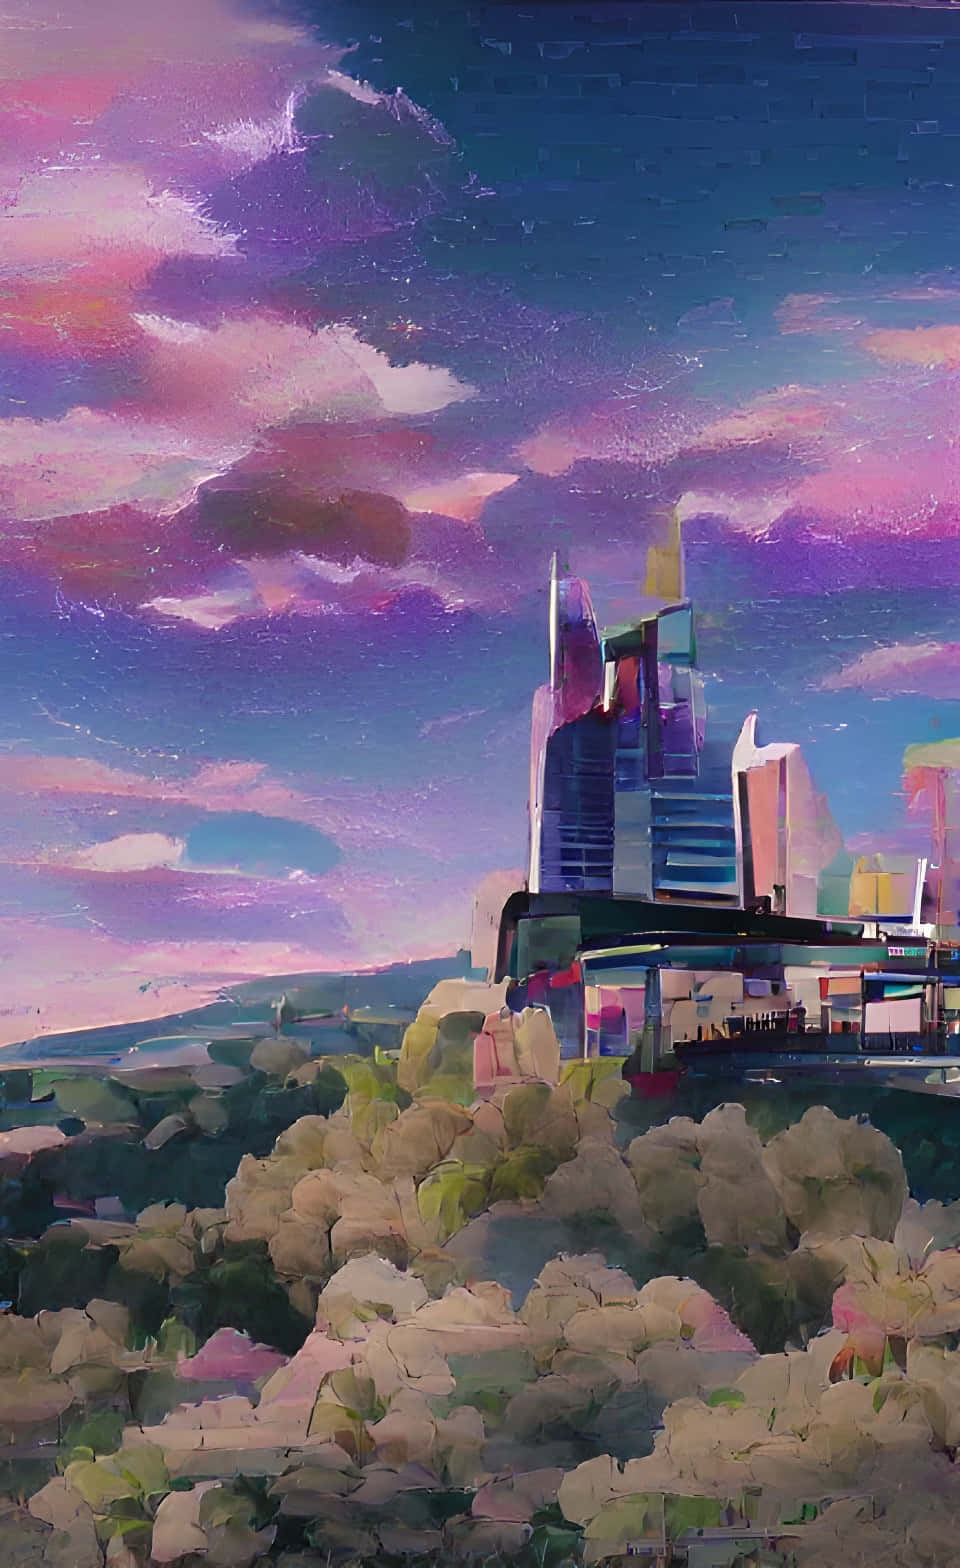 A painting of the city with purple clouds - Modern